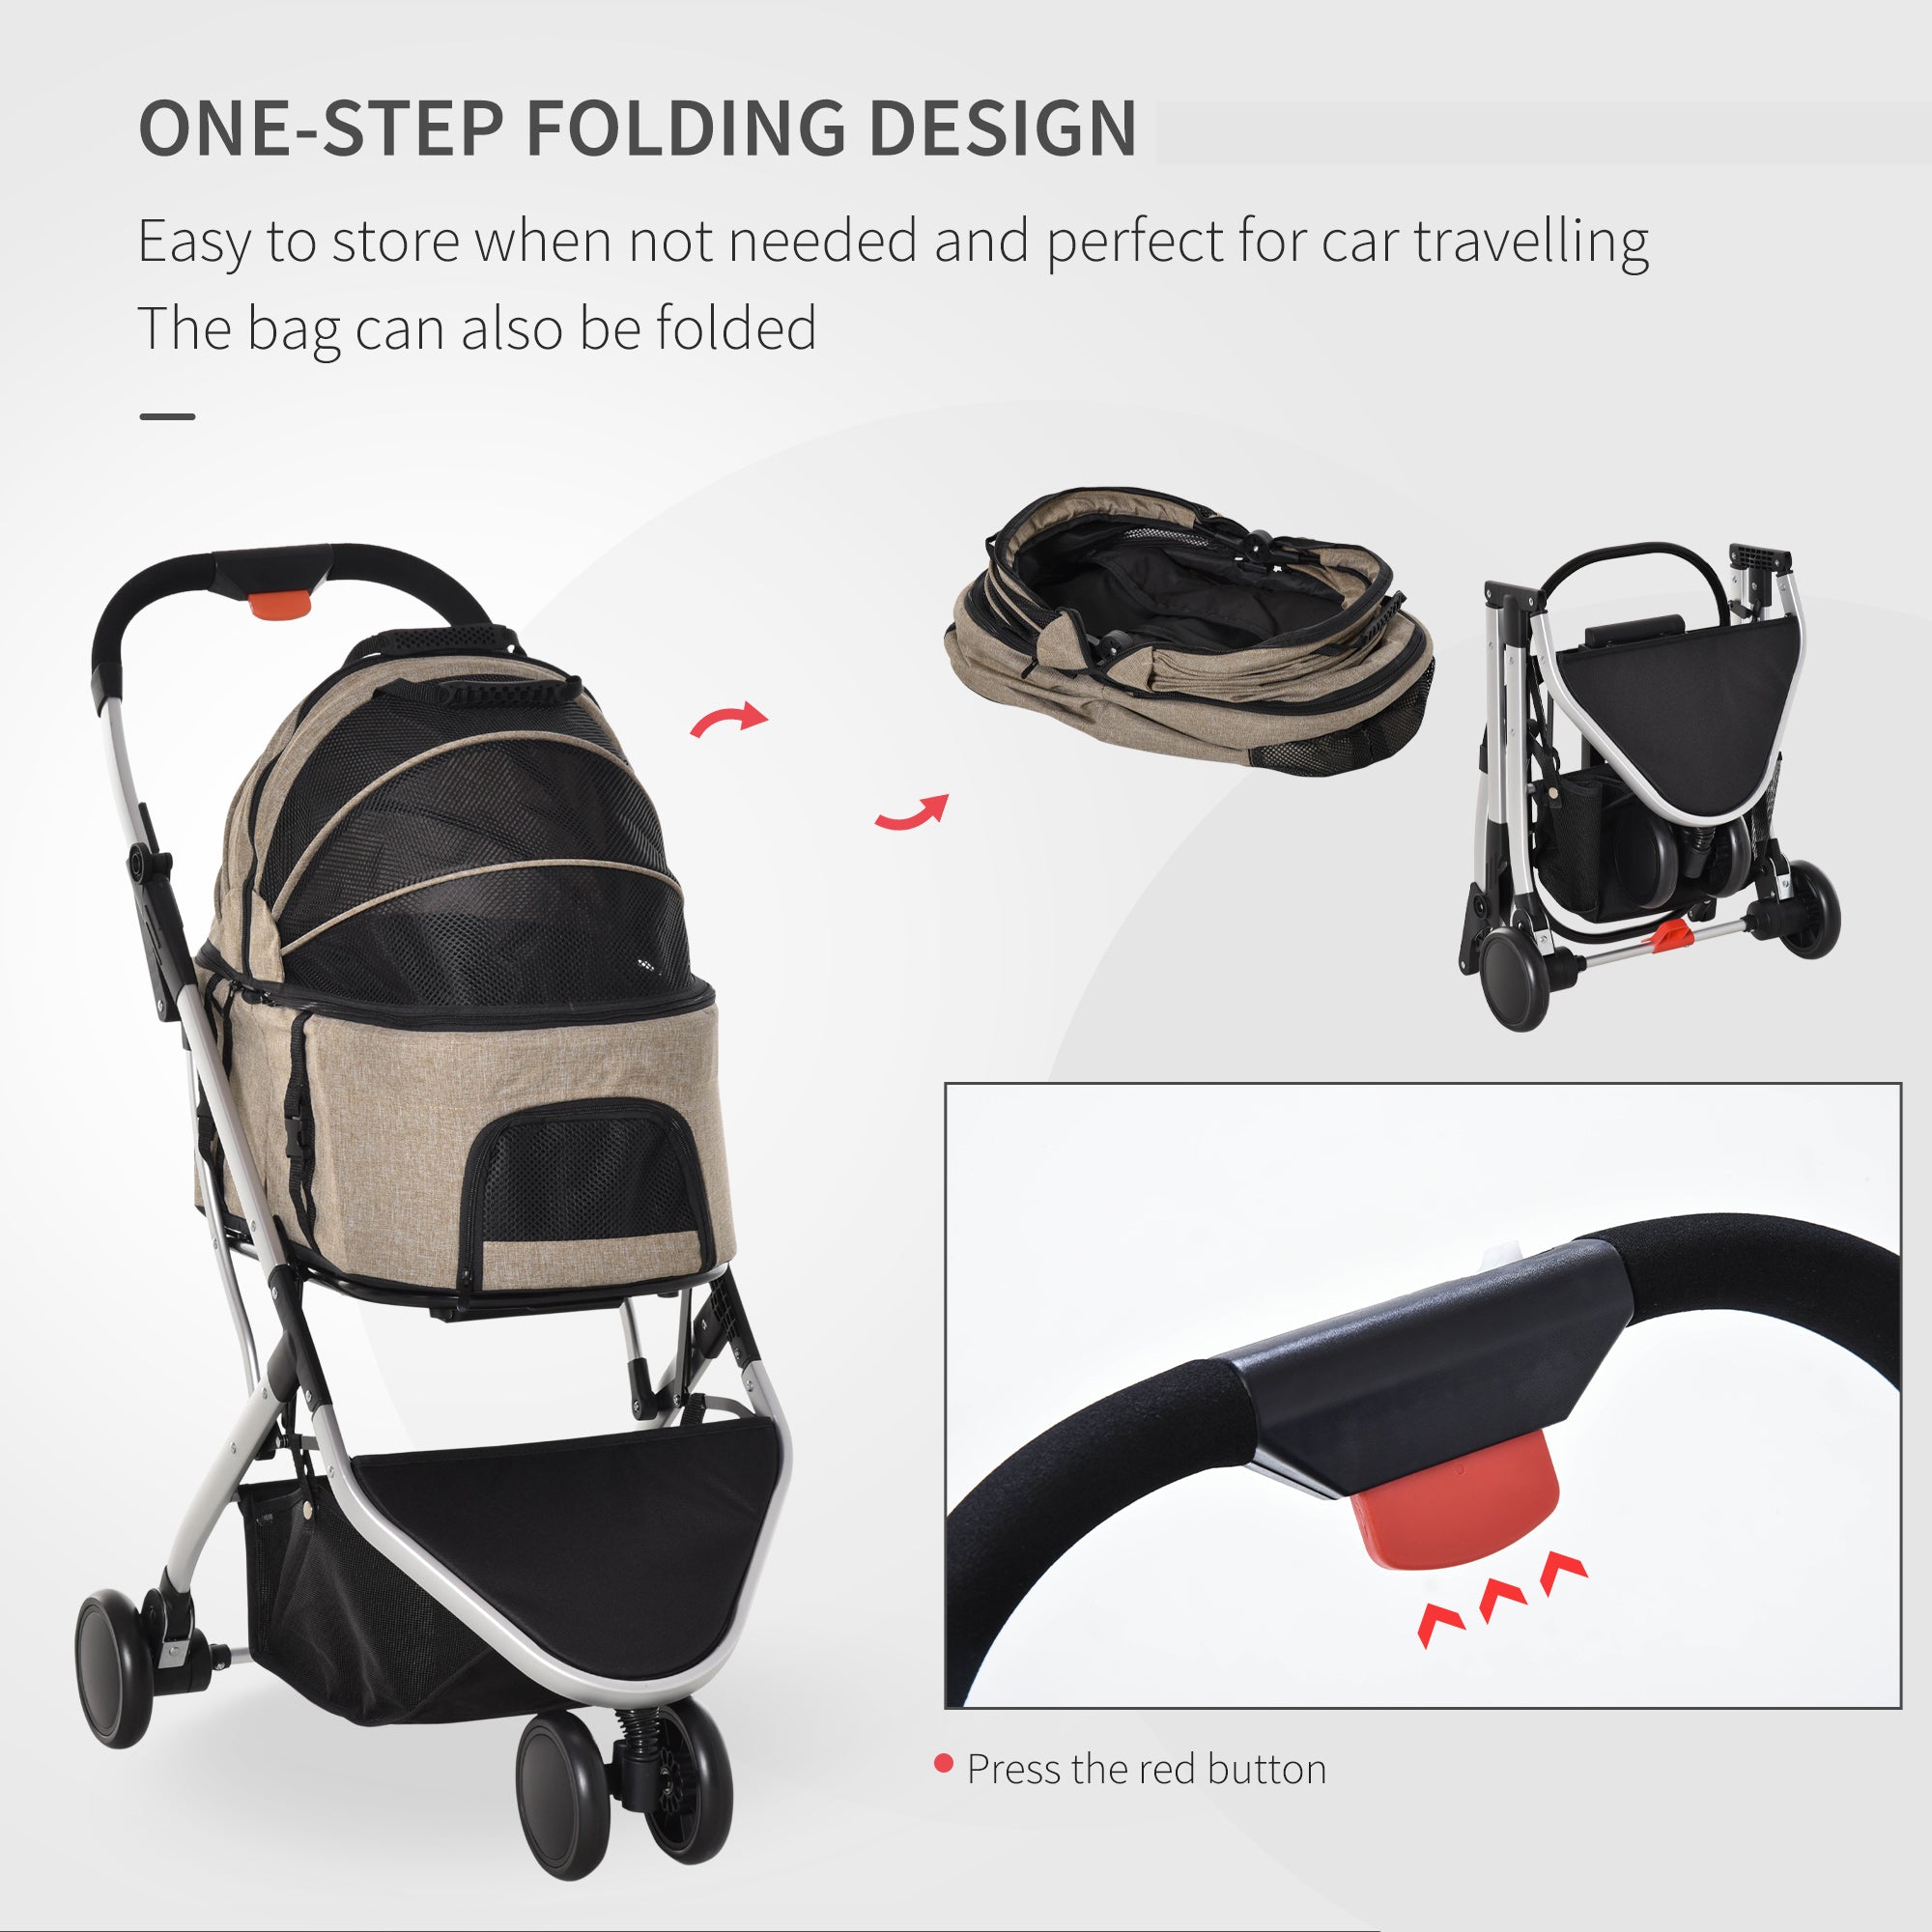 Detachable Pet Stroller 2-In-1 Foldable Dog Cat Travel Carriage Carrying Bag